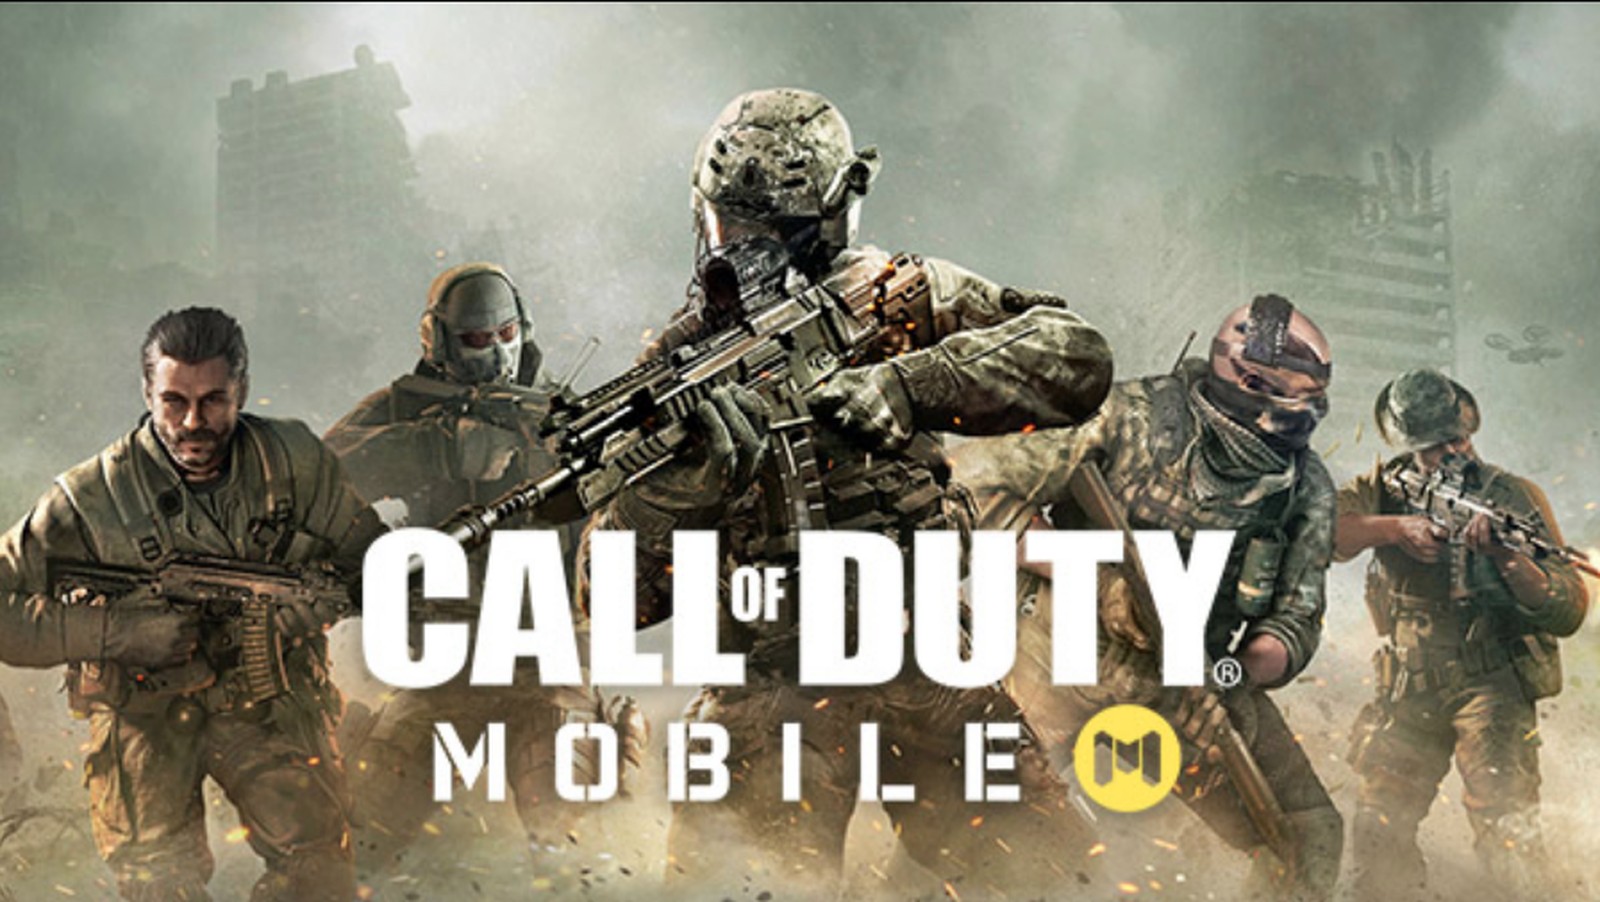 Cod Points grátis no Call of Duty Mobile